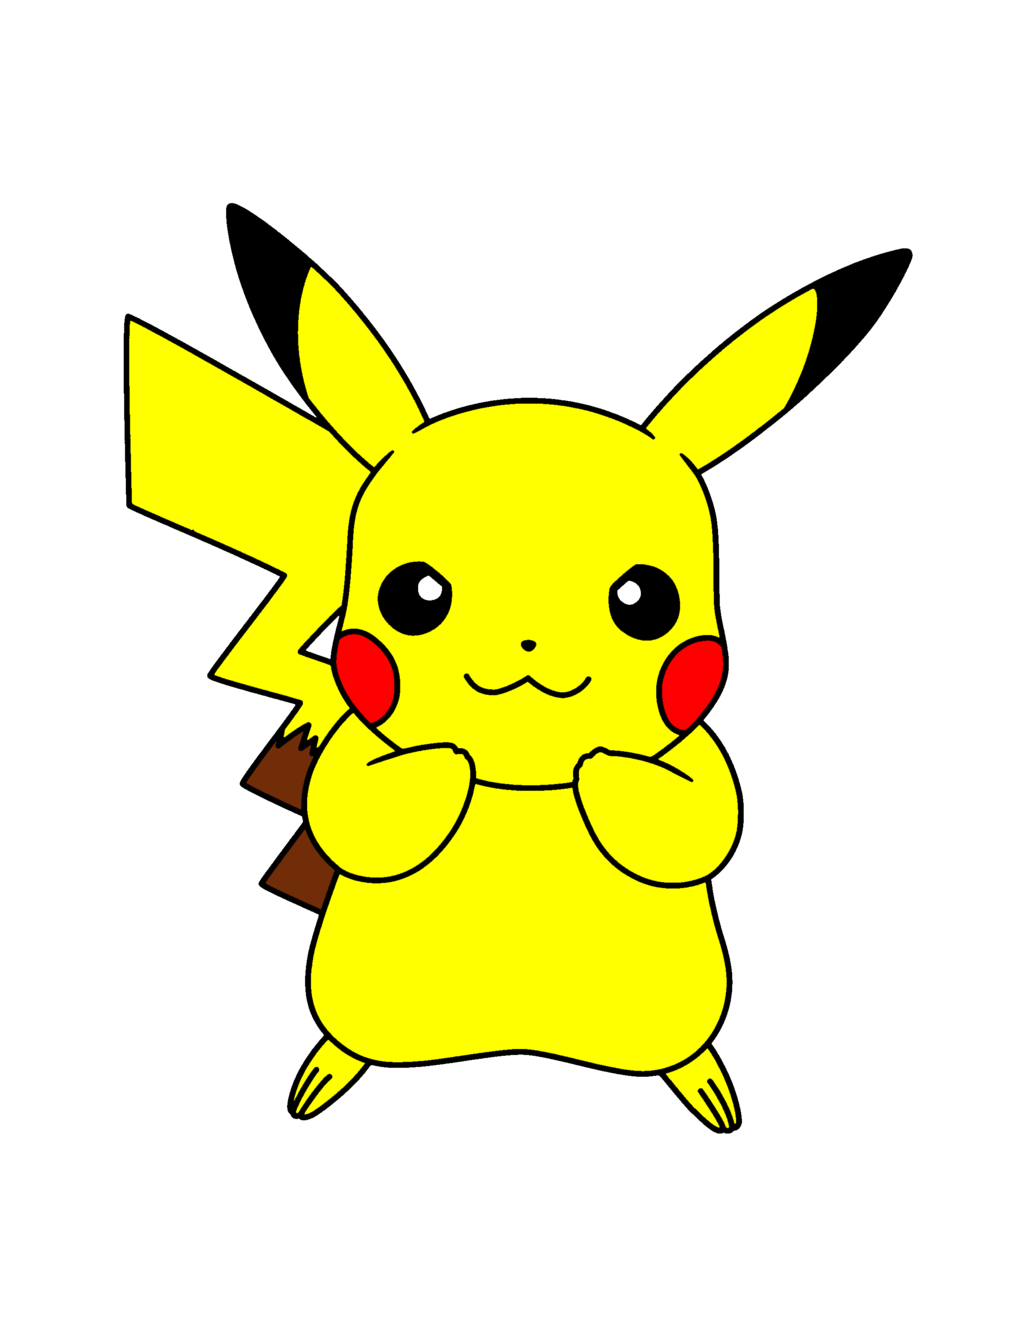 Animation Coloring Book Animated Cartoon - Pikachu Png Download - 1024*1323  - Free Transparent Animation Png Download. - Clip Art Library